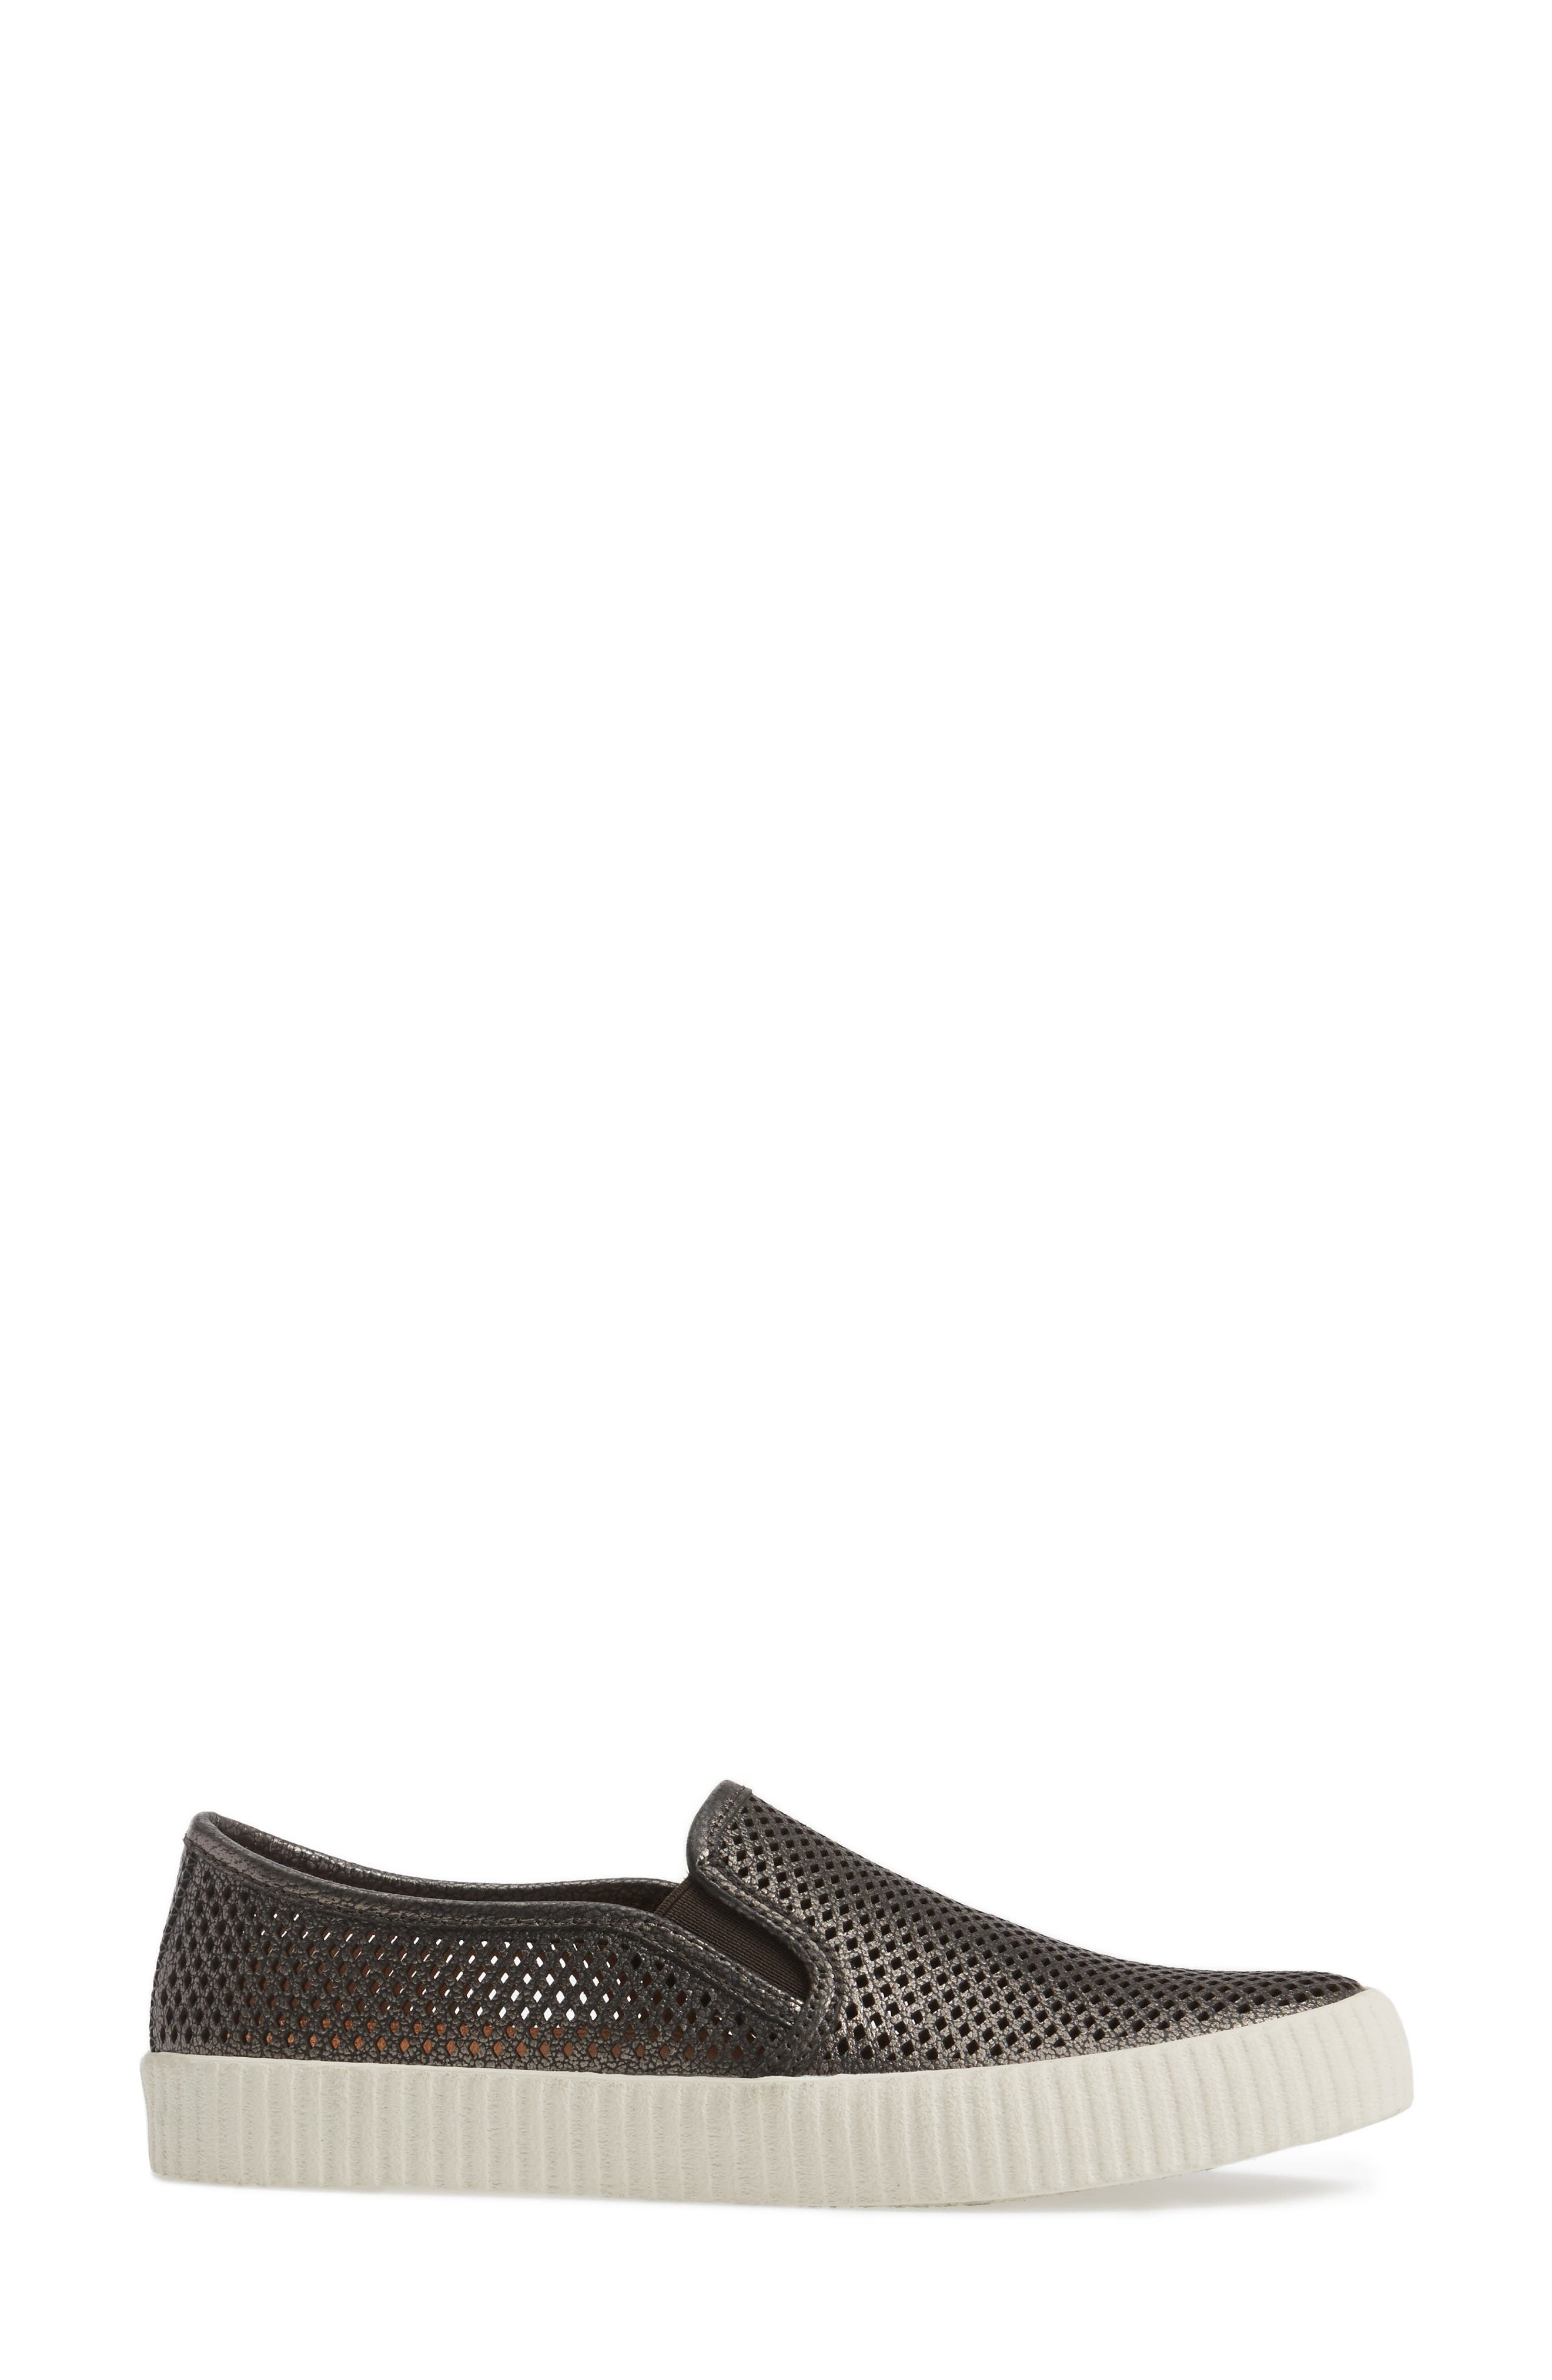 Frye | Camille Perforated Slip-On 